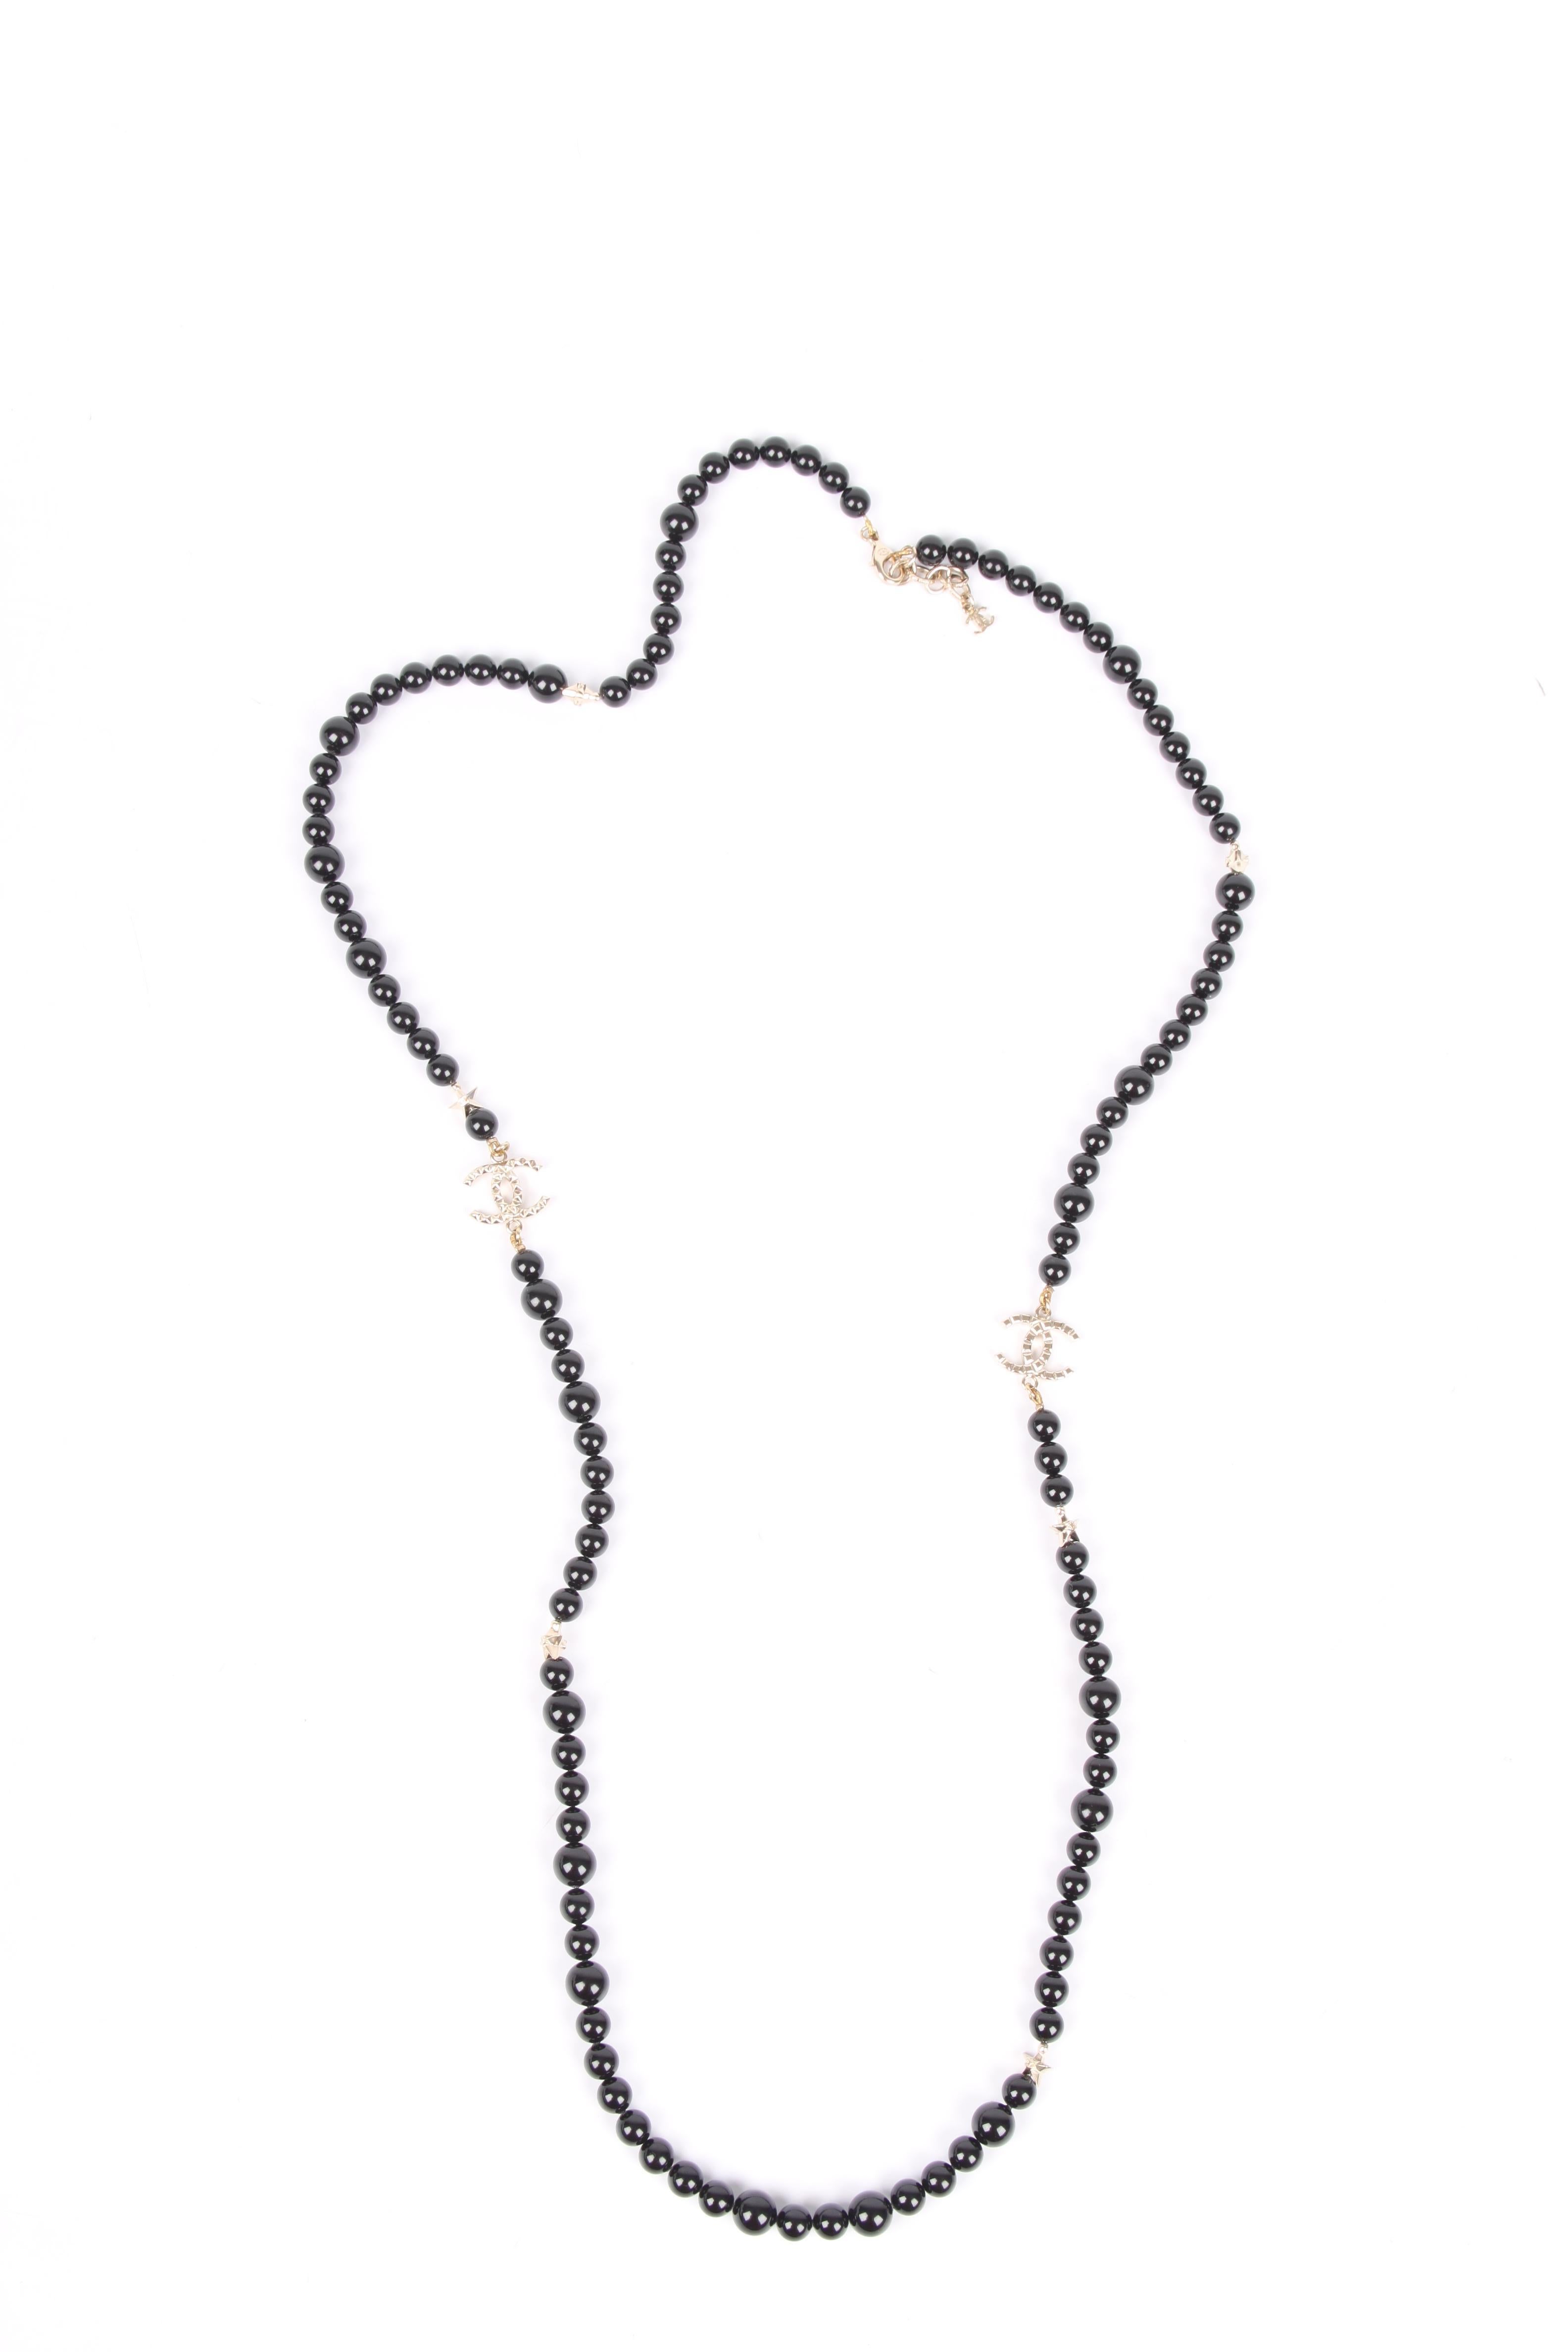 chanel beads necklace